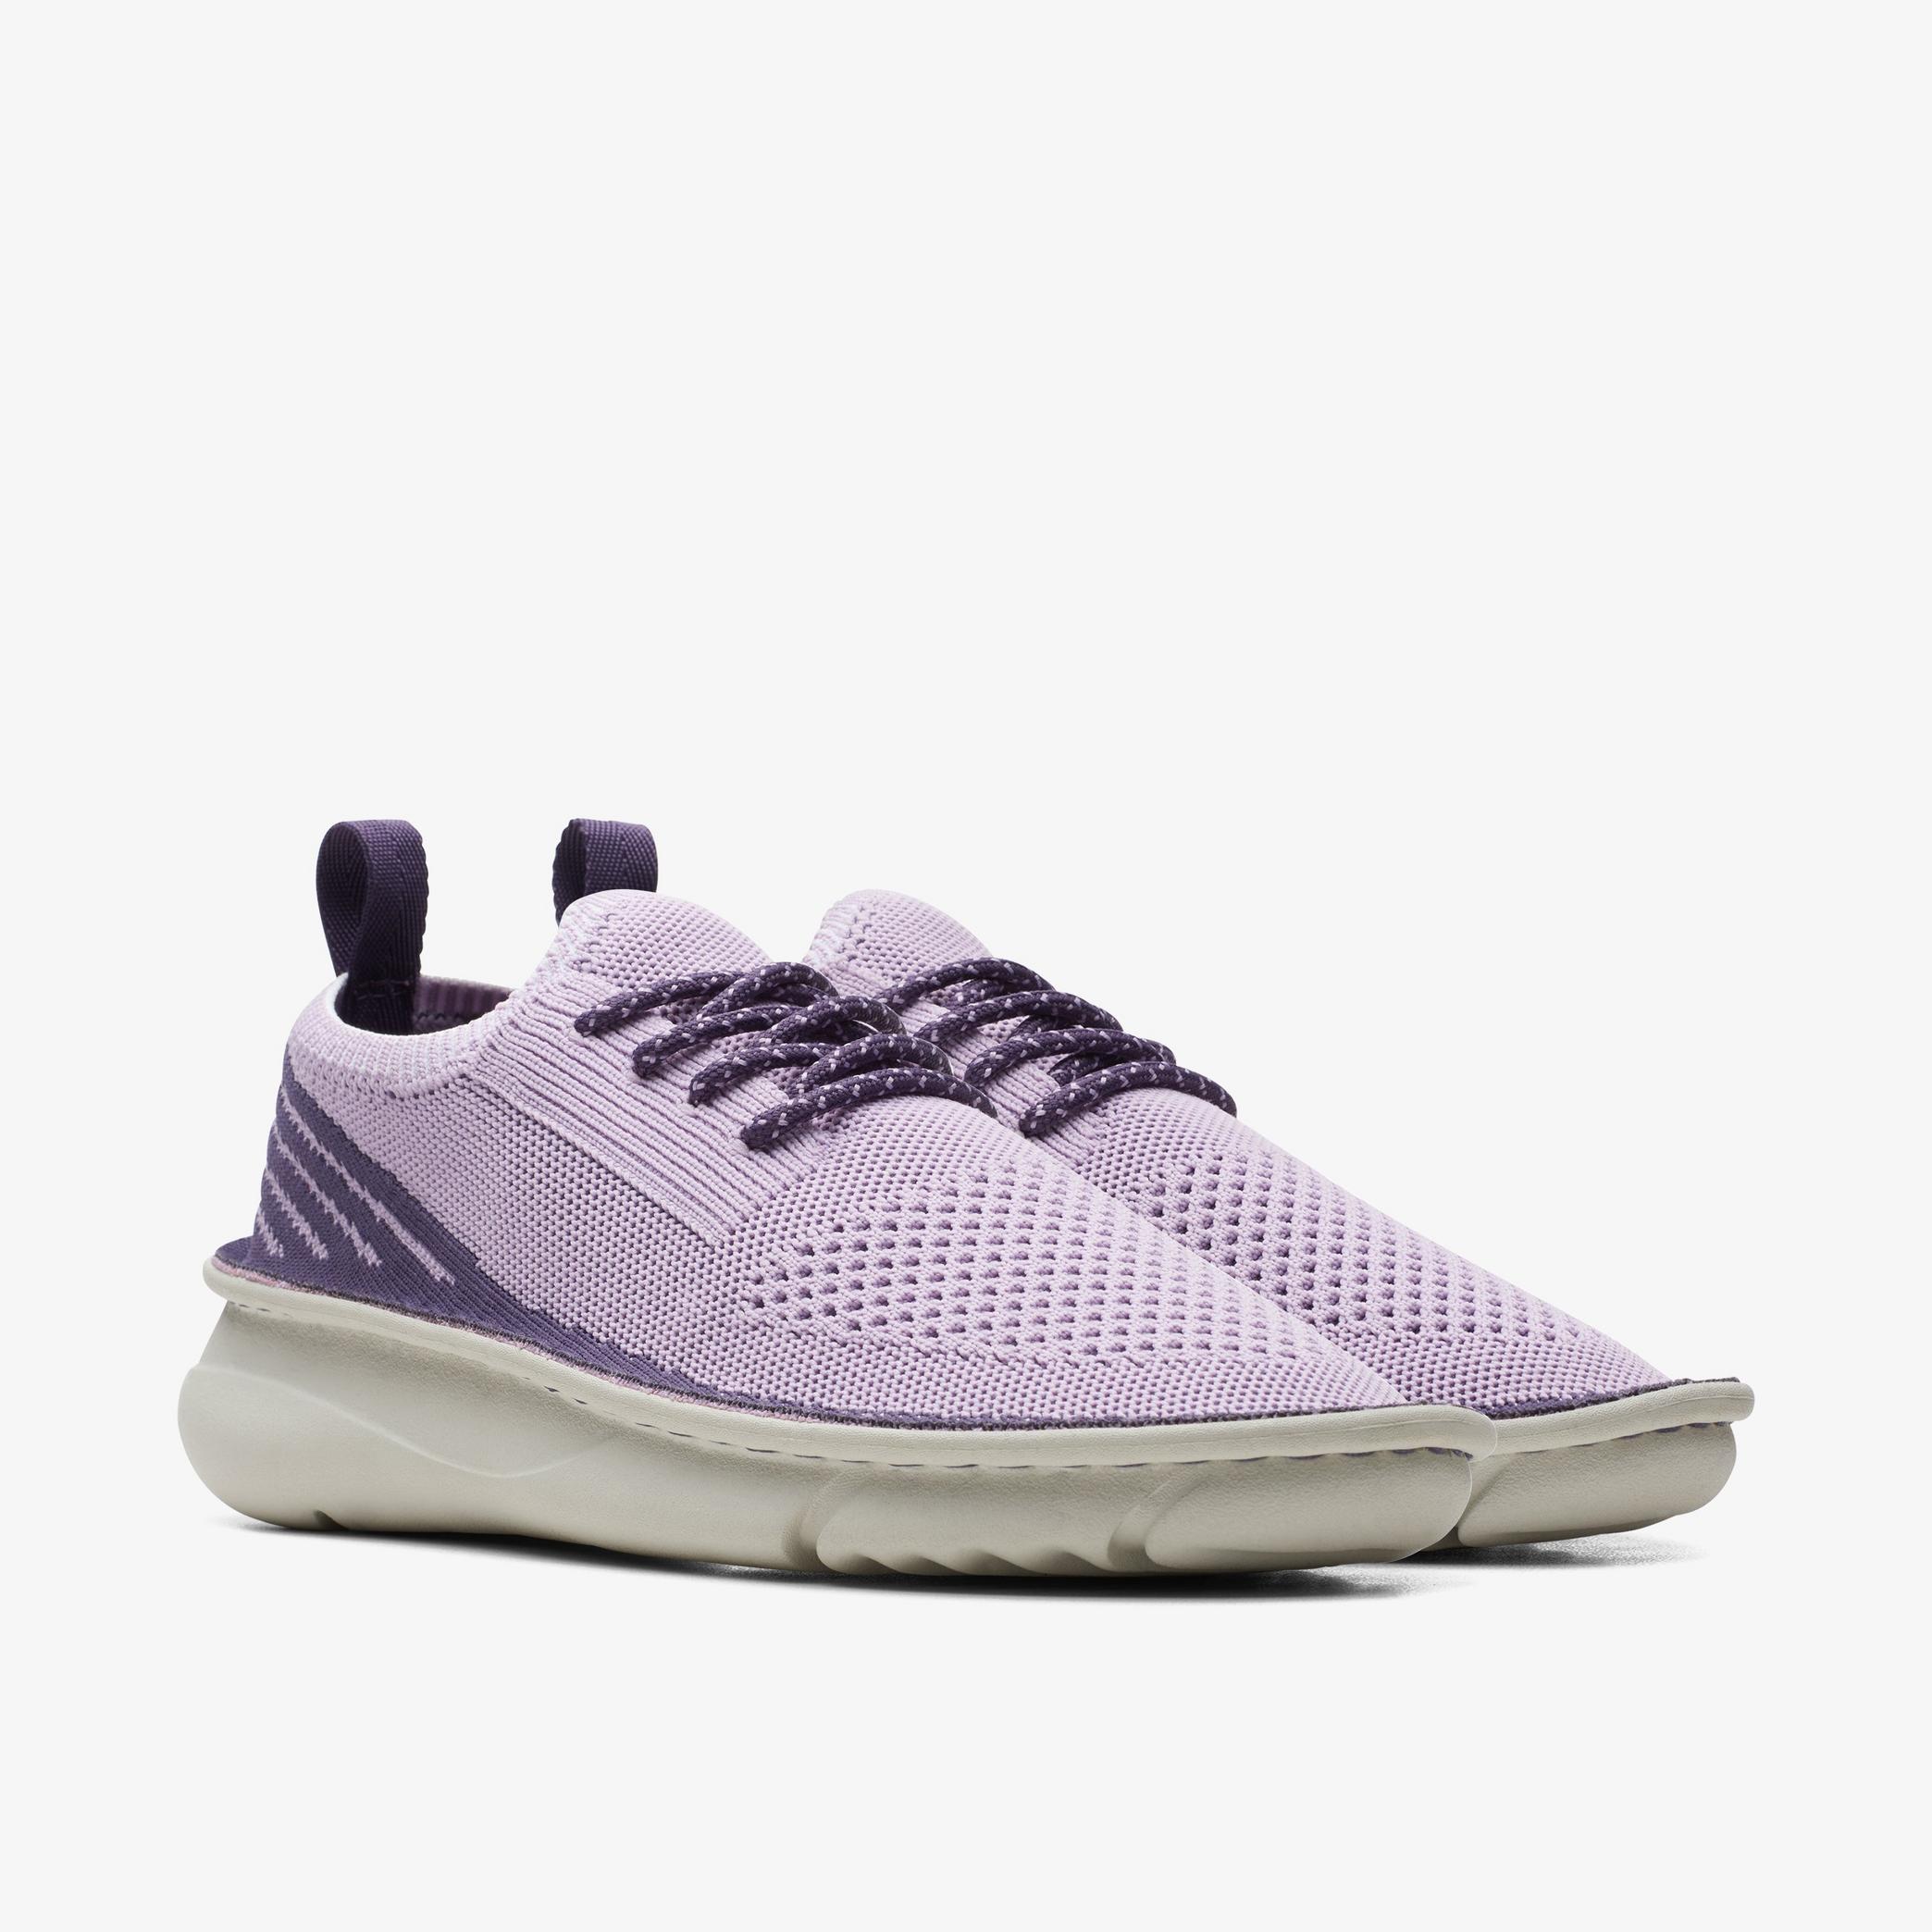 Clarks Origin2 Lavender Knit Trainers, view 4 of 6